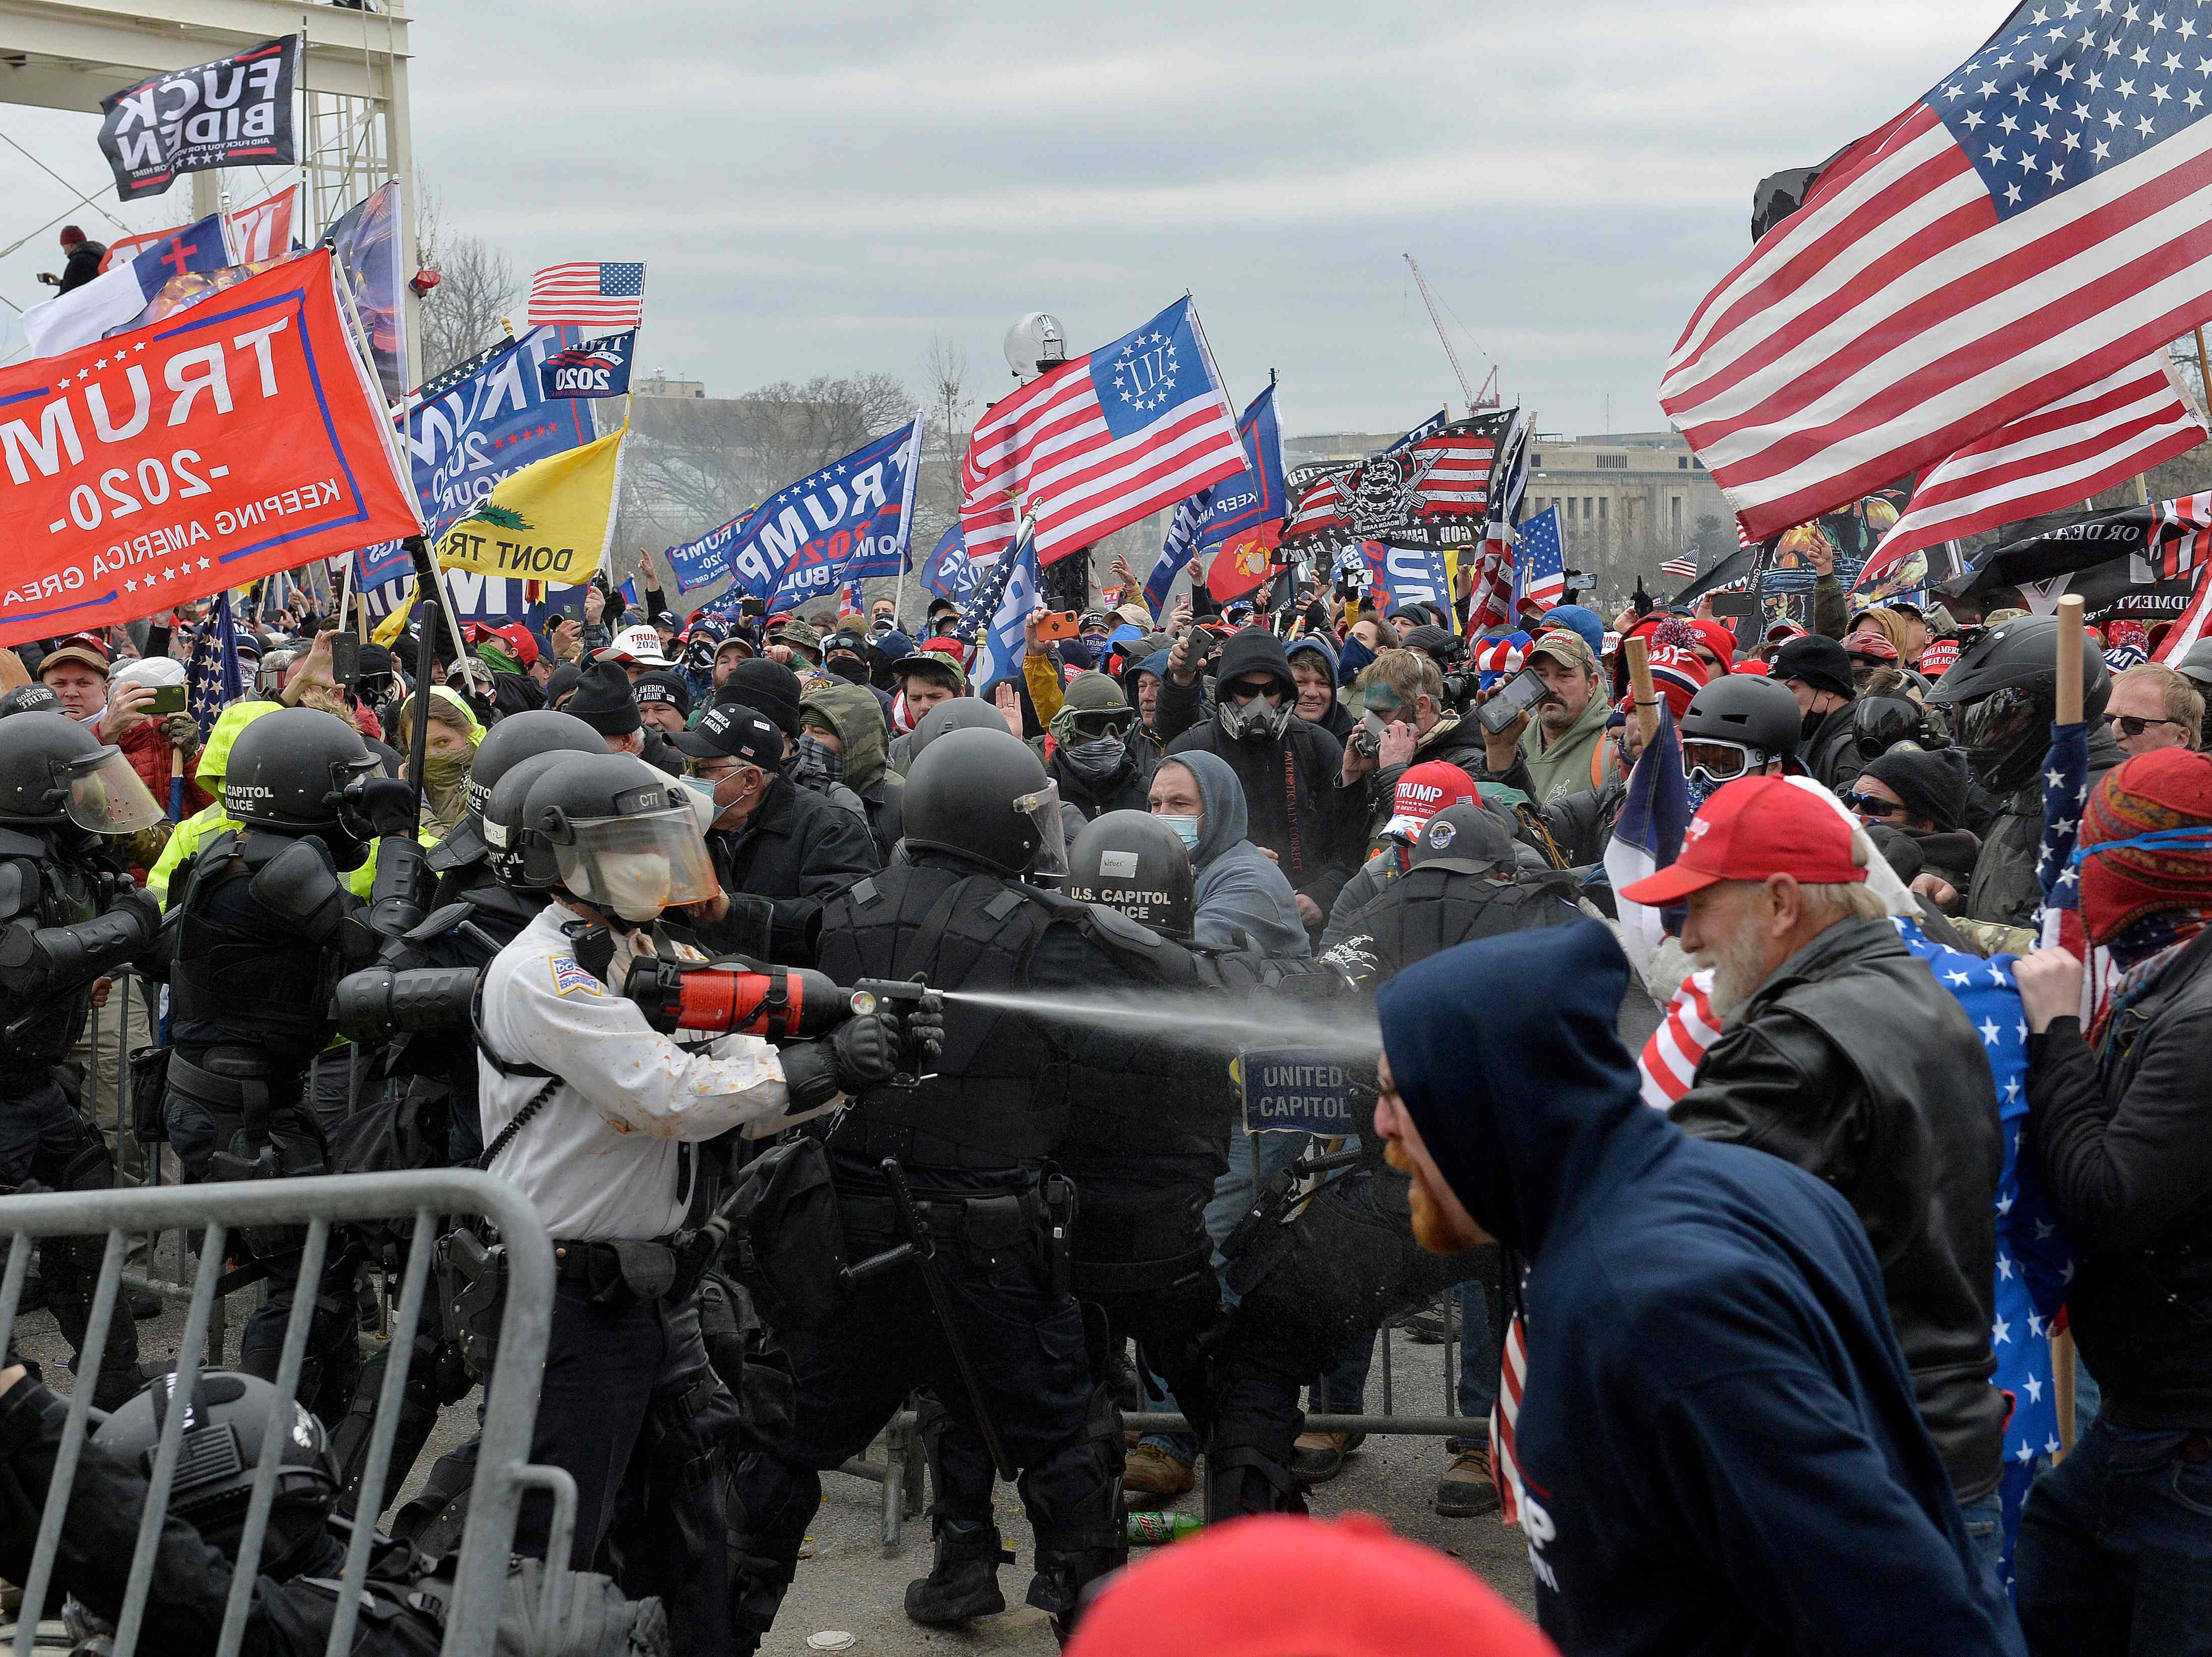 Trump supporters clash with police and security forces as they try to storm the US Capitol in Washington, DC